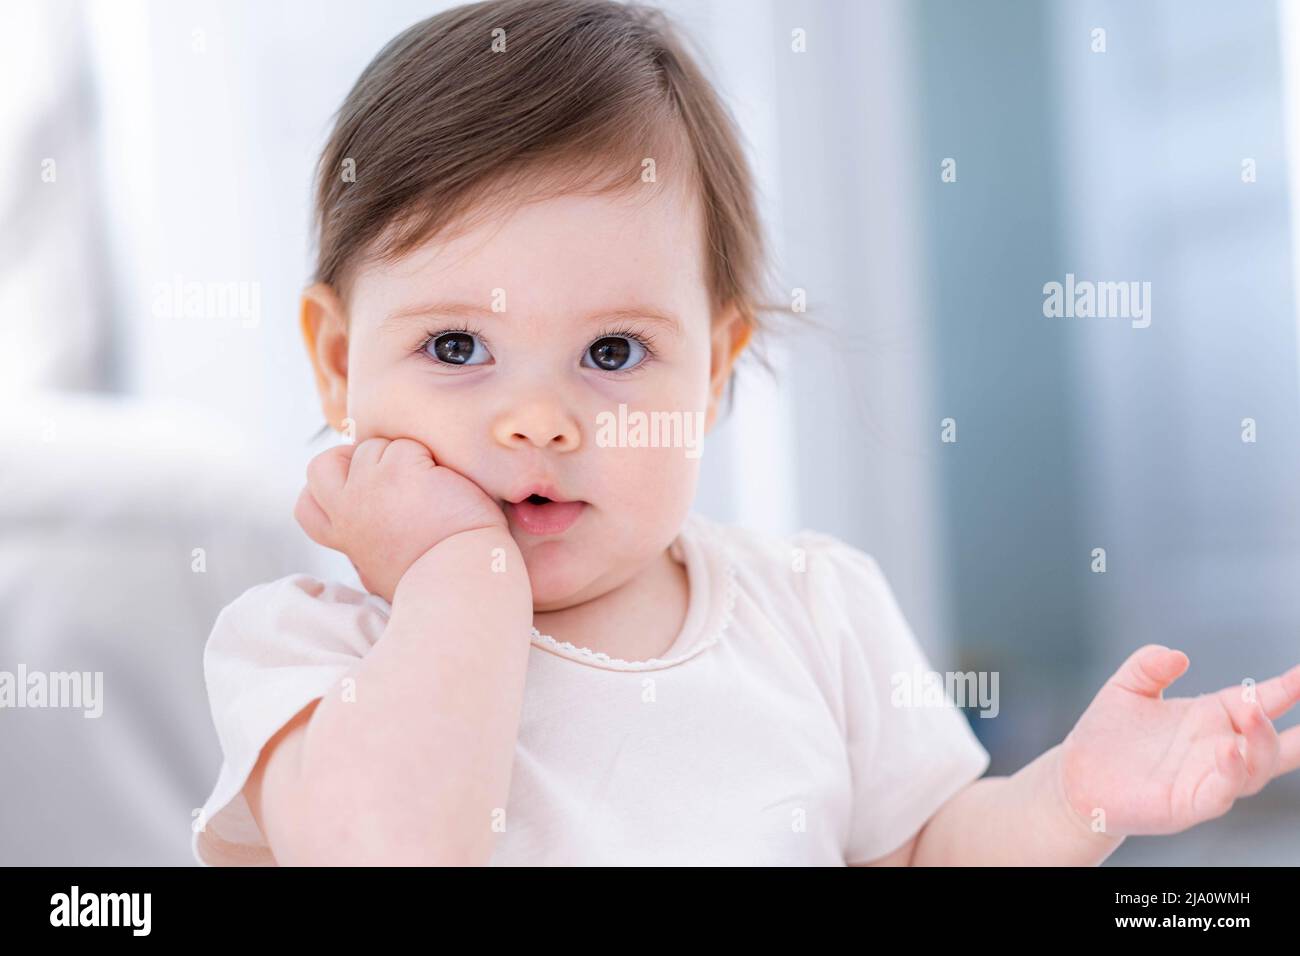 Thoughtful cute little baby girl thinking puzzled of something dreaming or having a good idea, smiling and looking up, imagination. Stock Photo